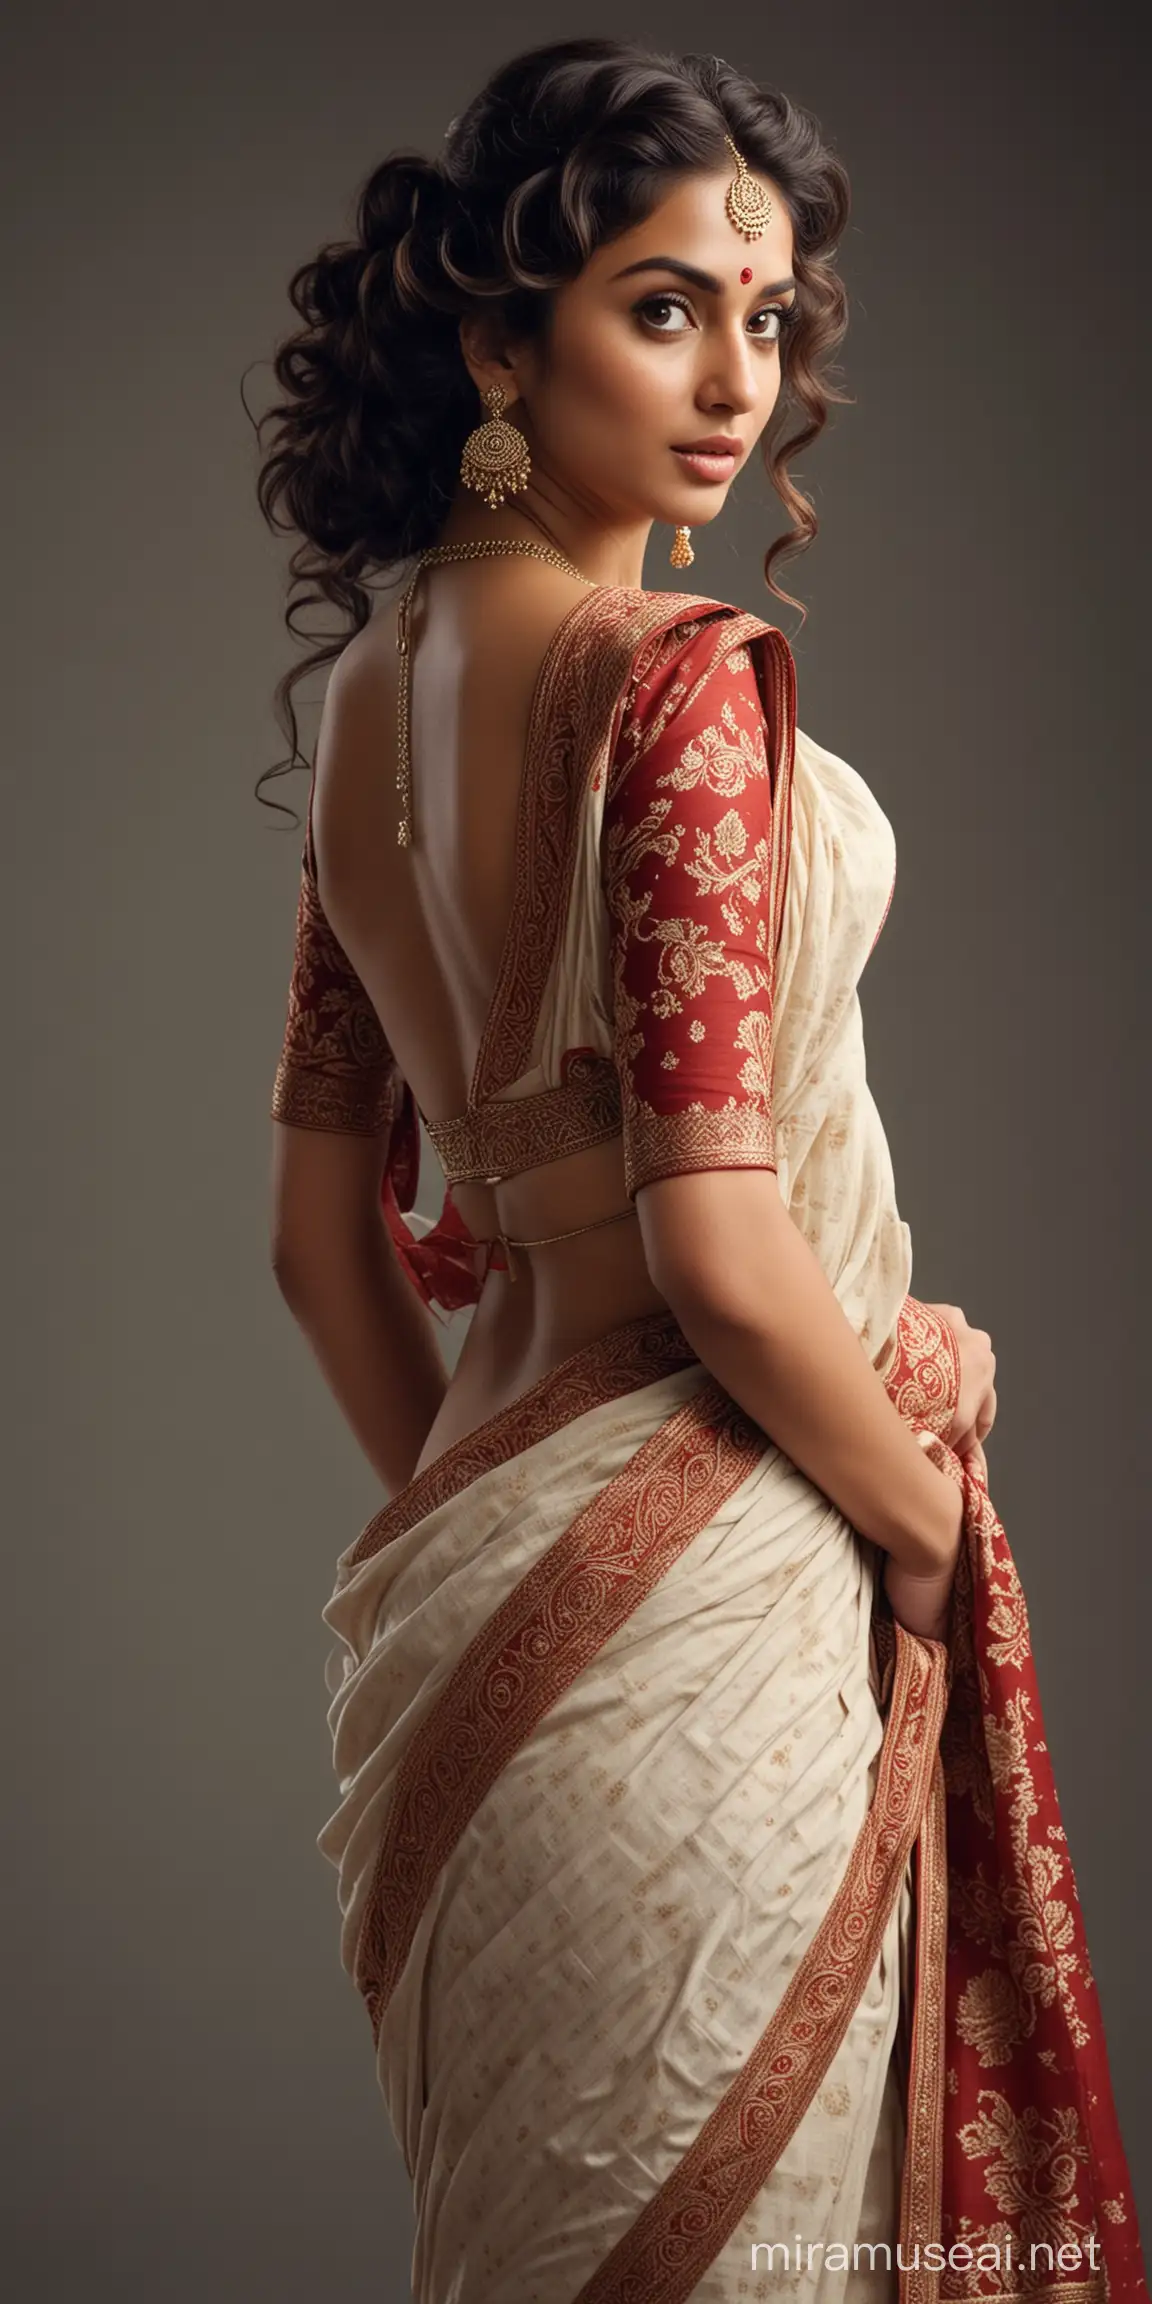 Elegant Indian Woman in Saree with Arrogant Stance and Intricate Details